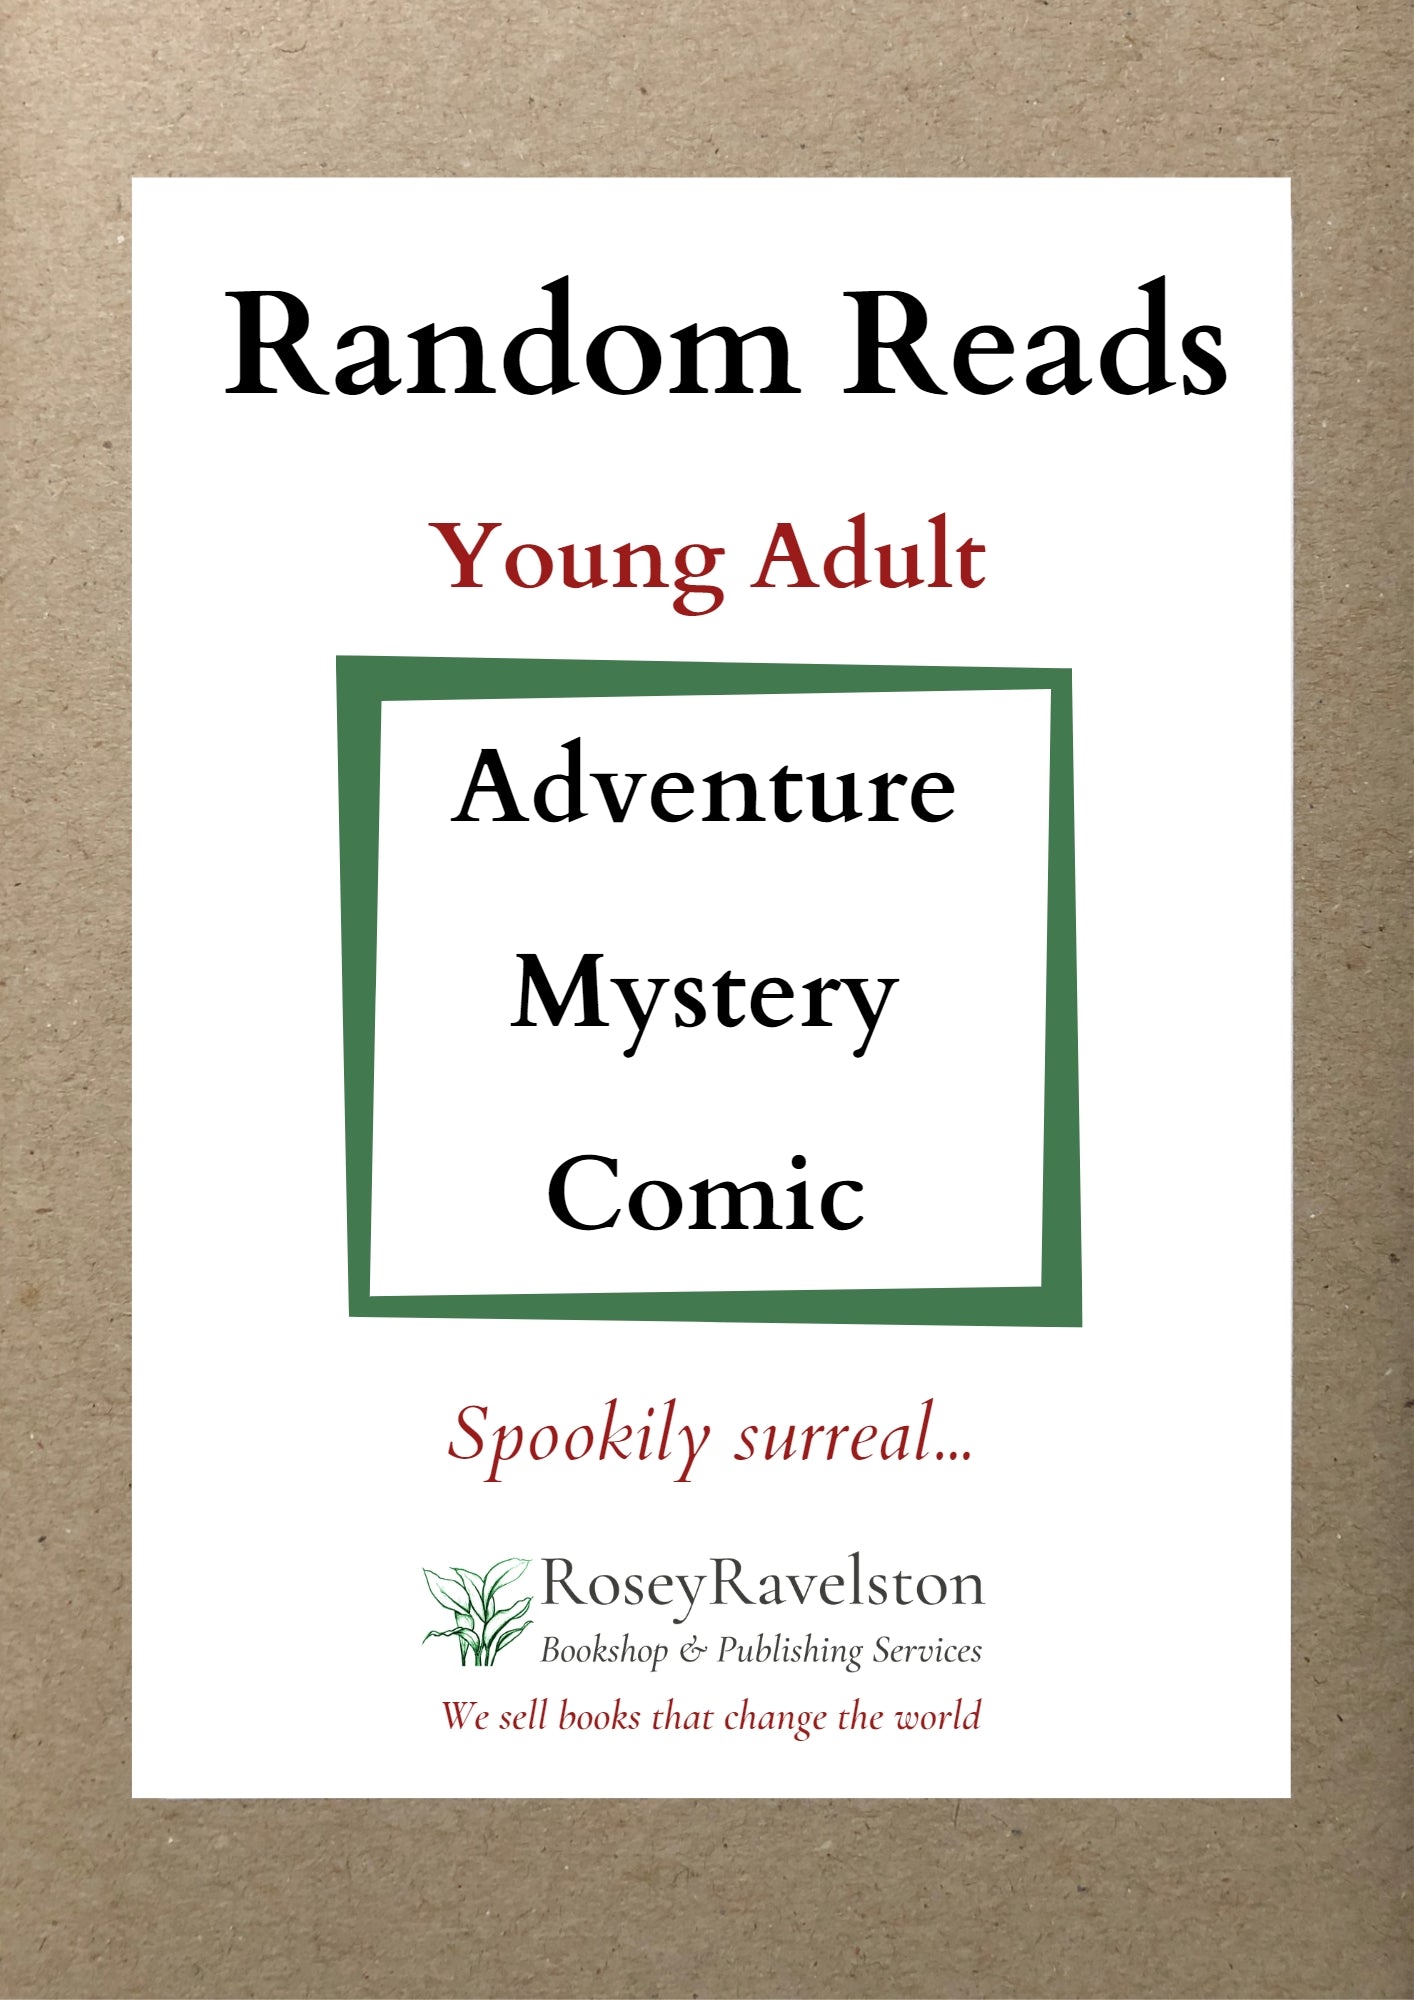 Random Reads - Young Adult